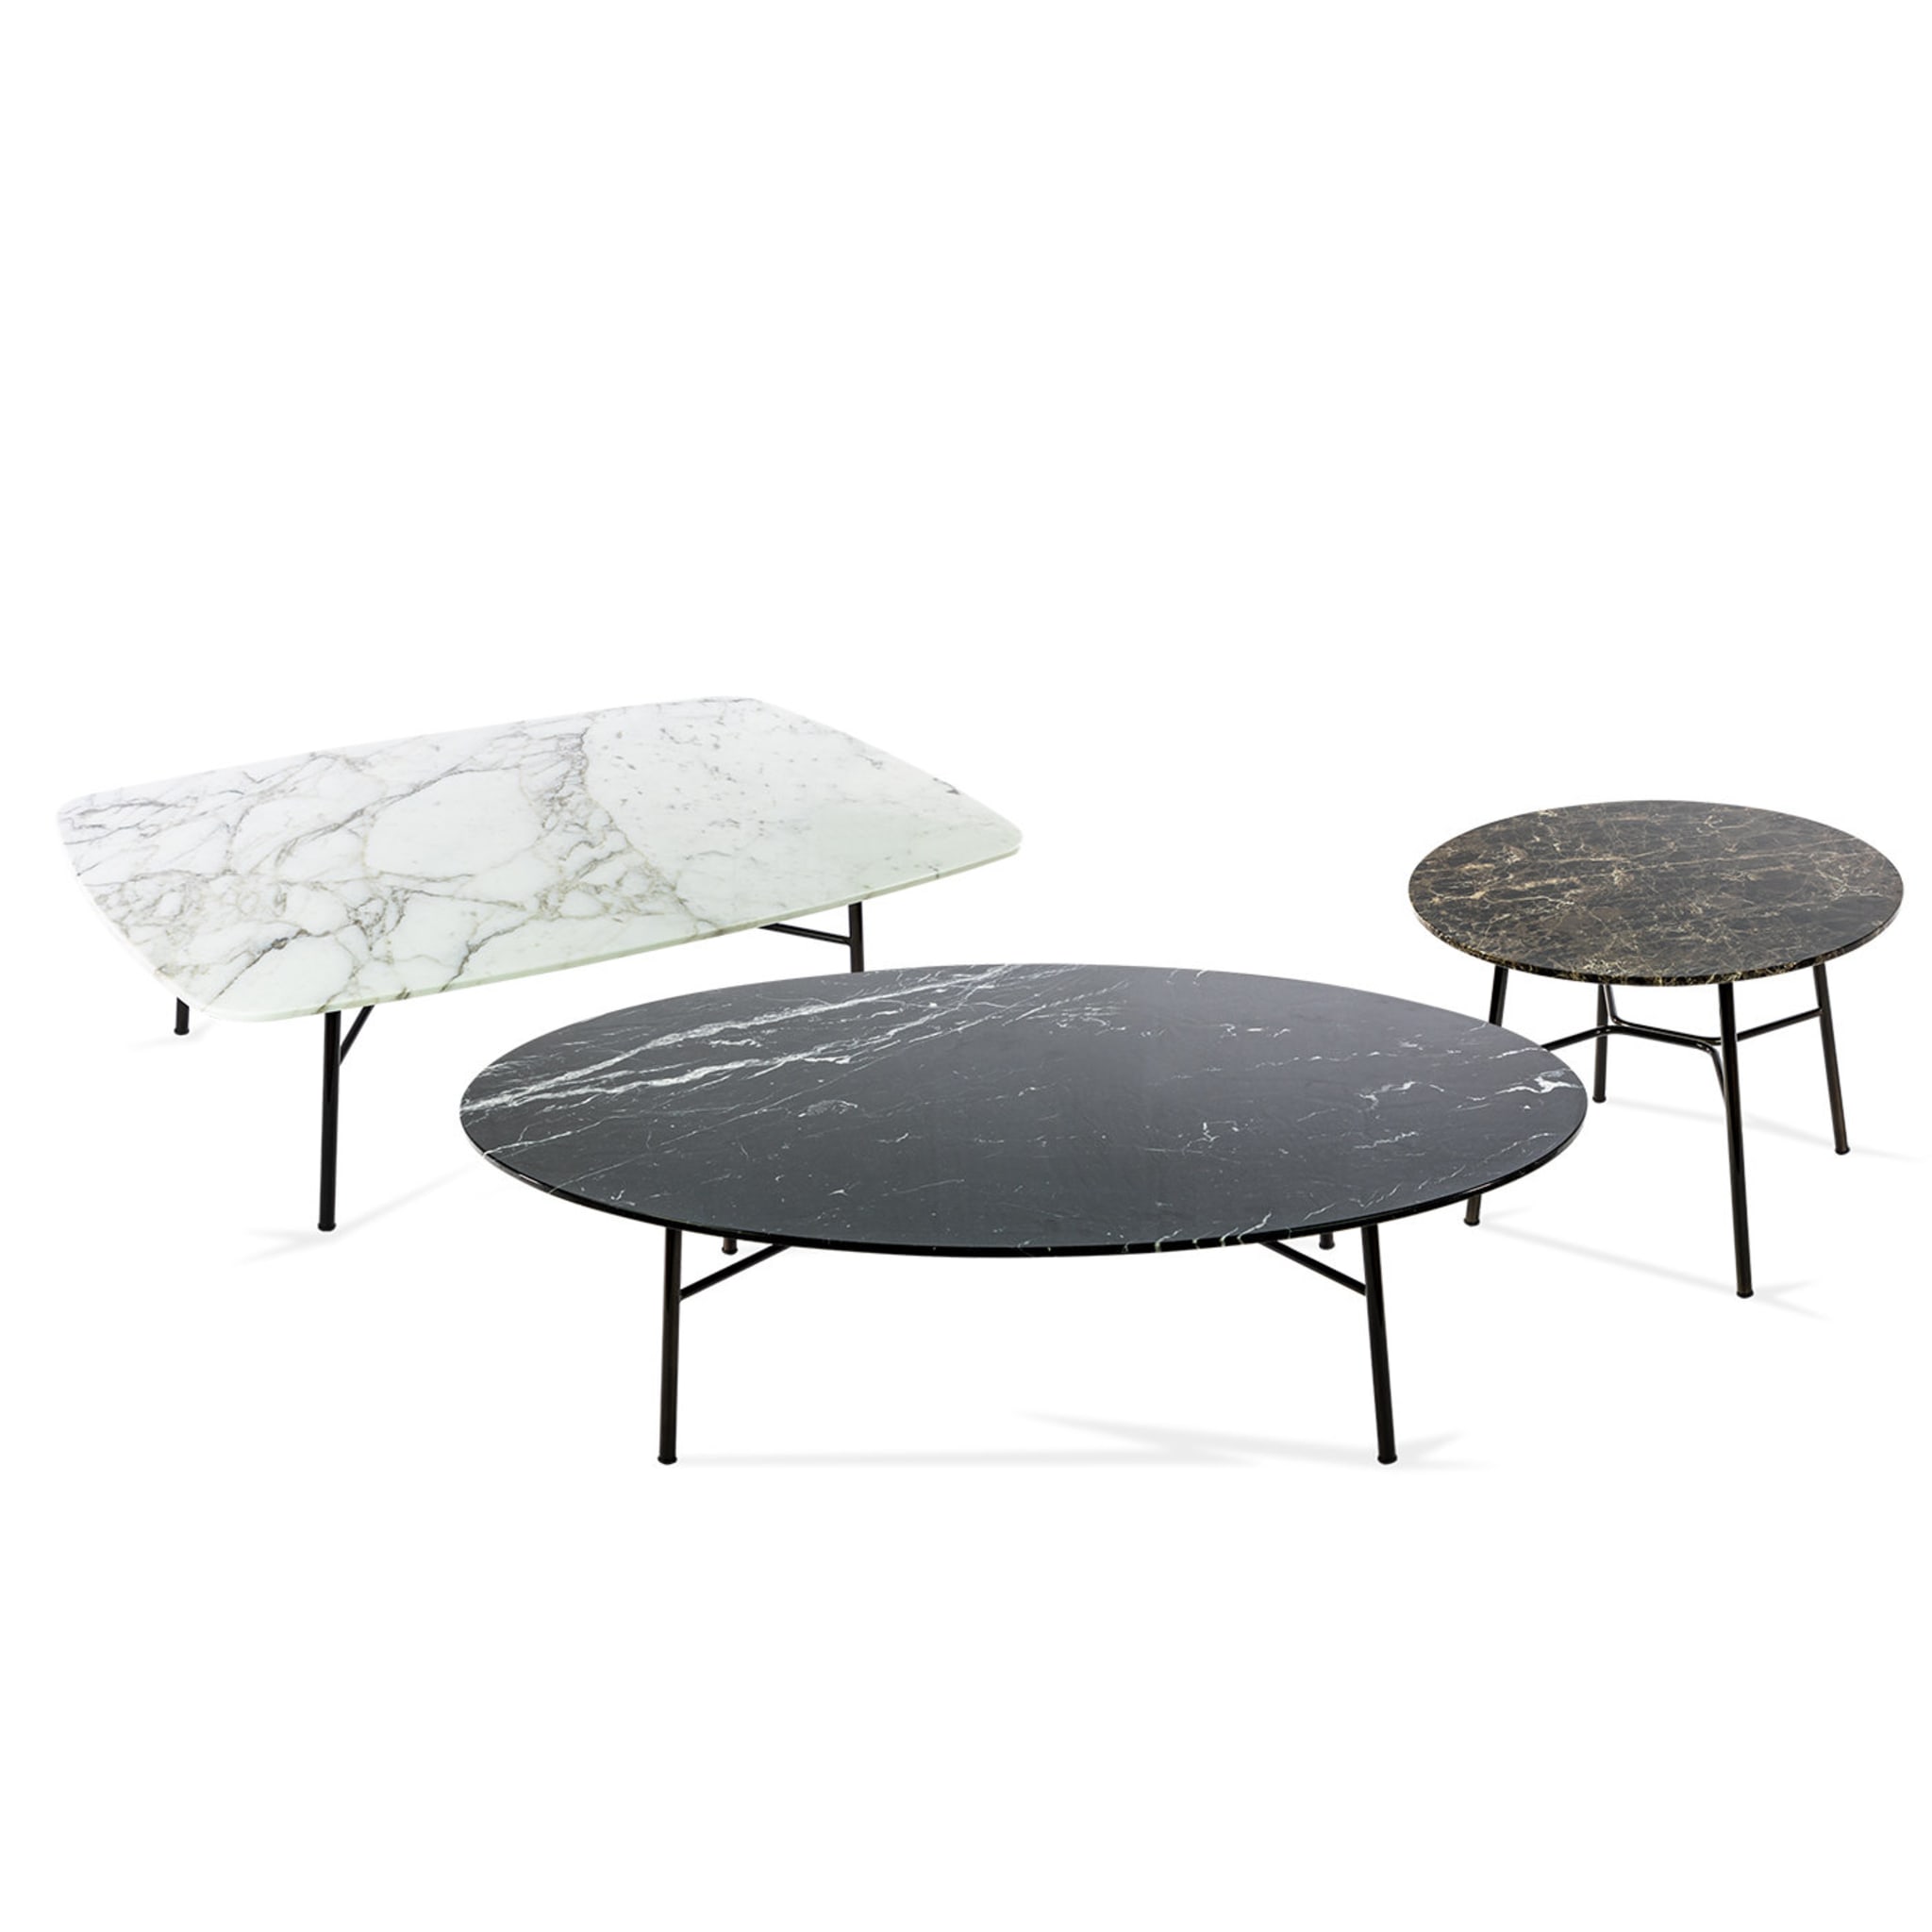 Yuki Oval Coffee Table with Black Marquinia Top # 1 by Ep Studio - Alternative view 3